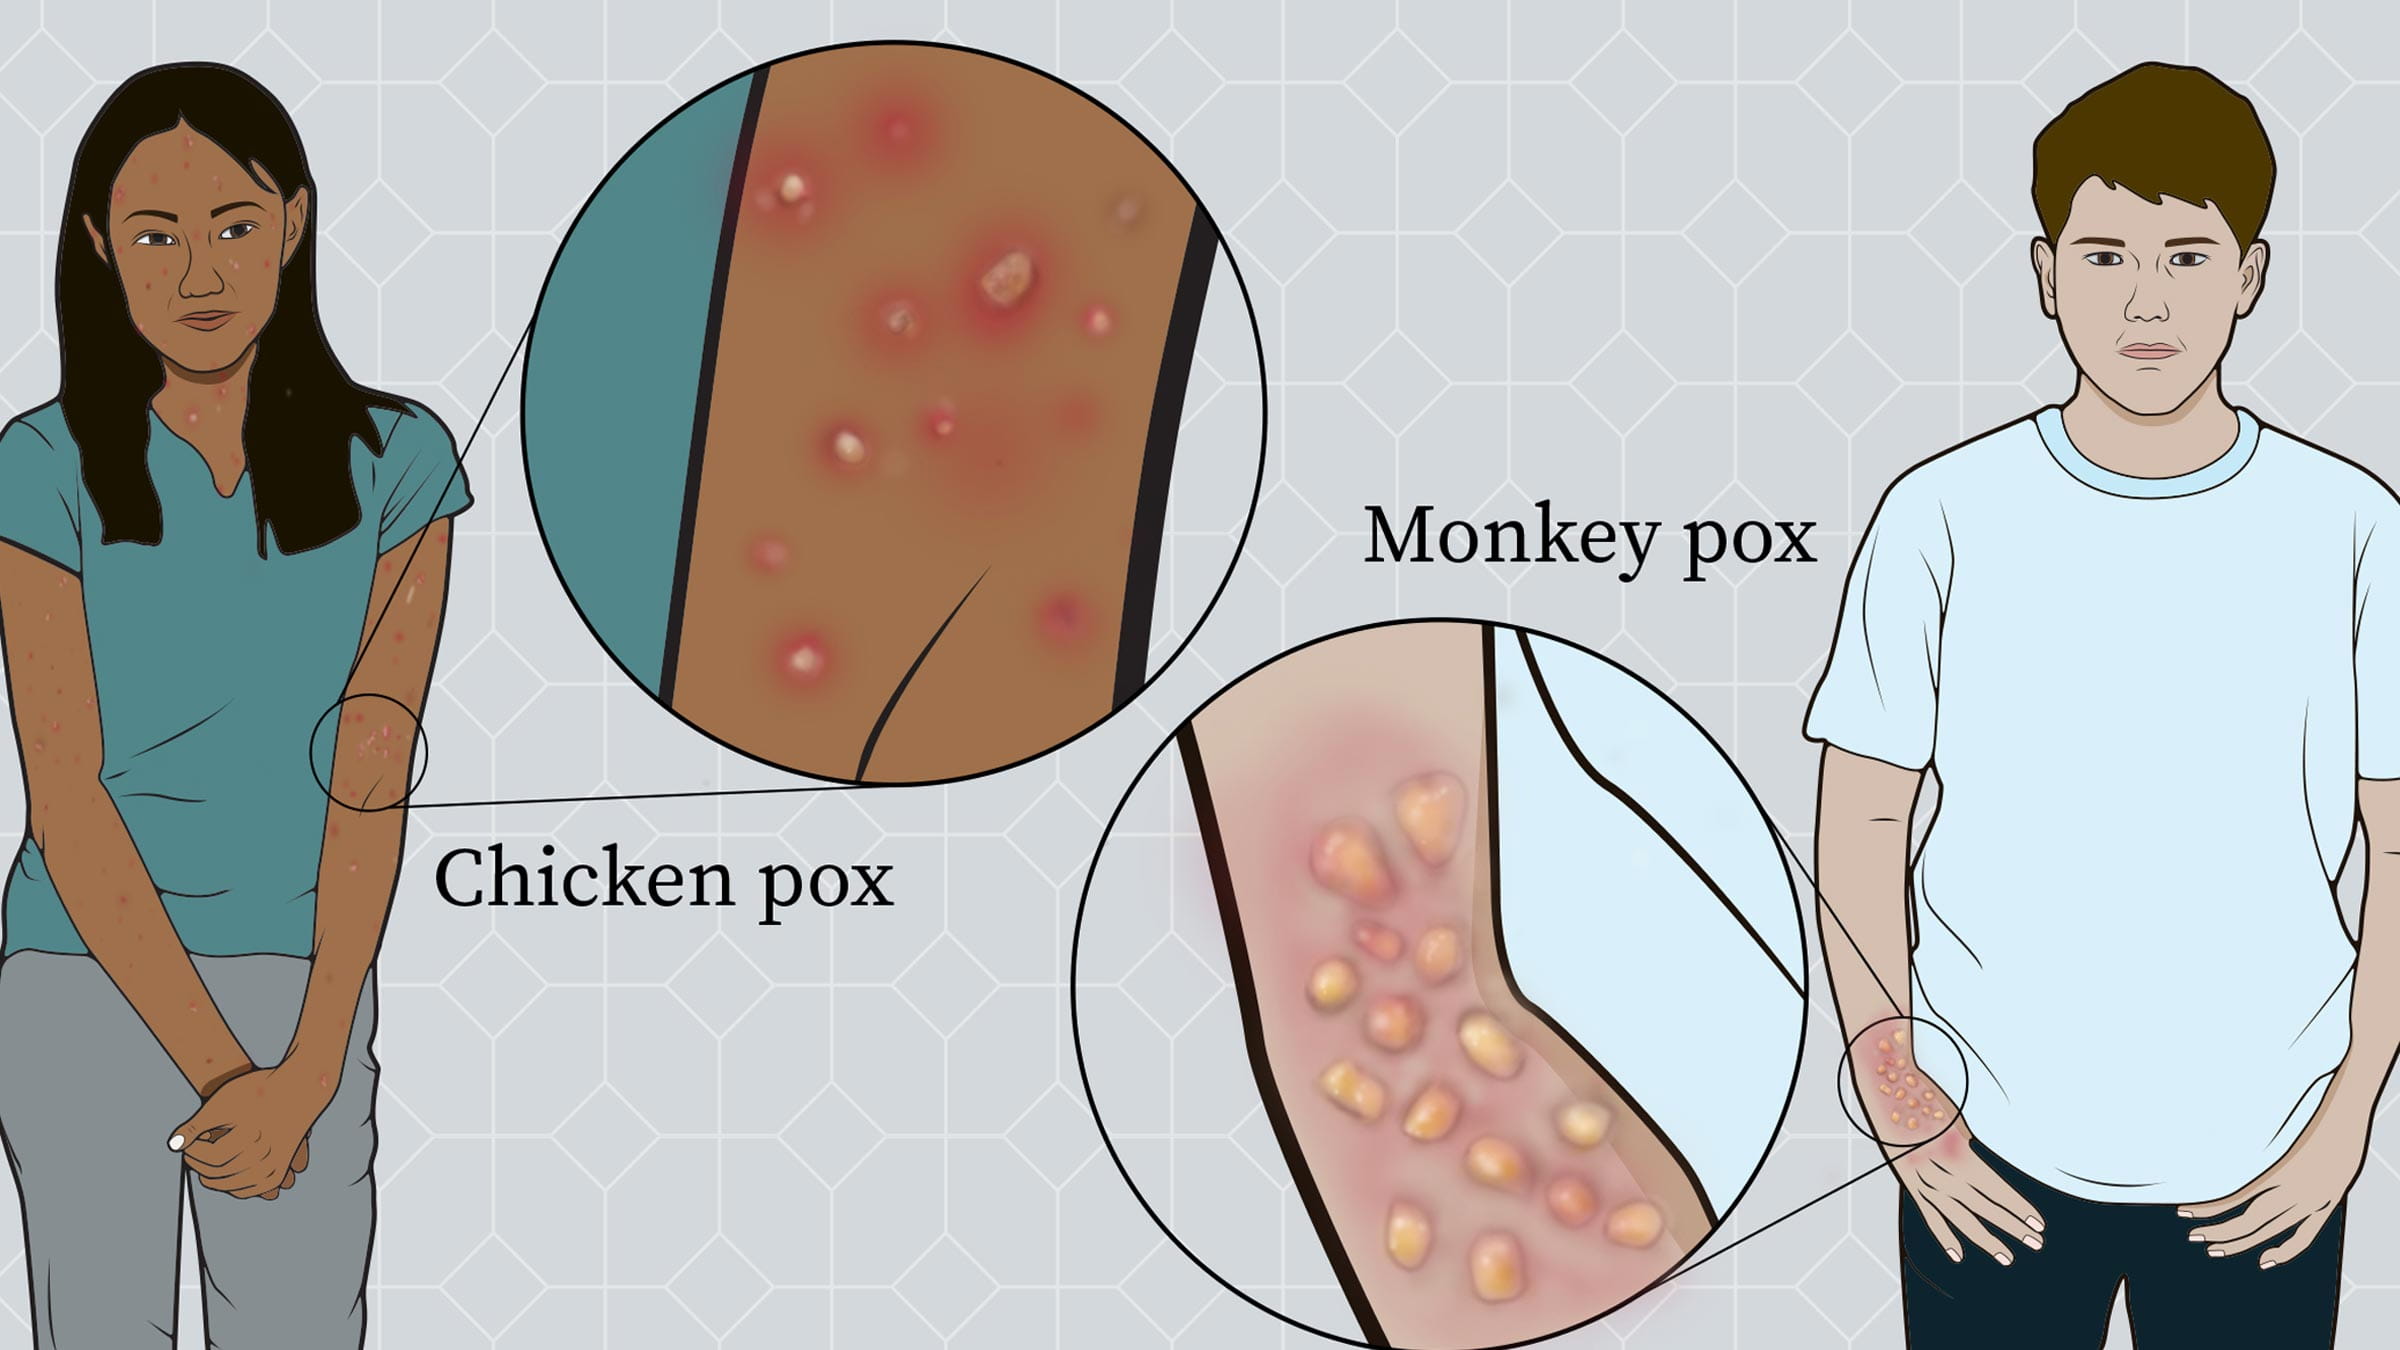 Illustration of a person with monkeypox sores and a person with chickenpox sores